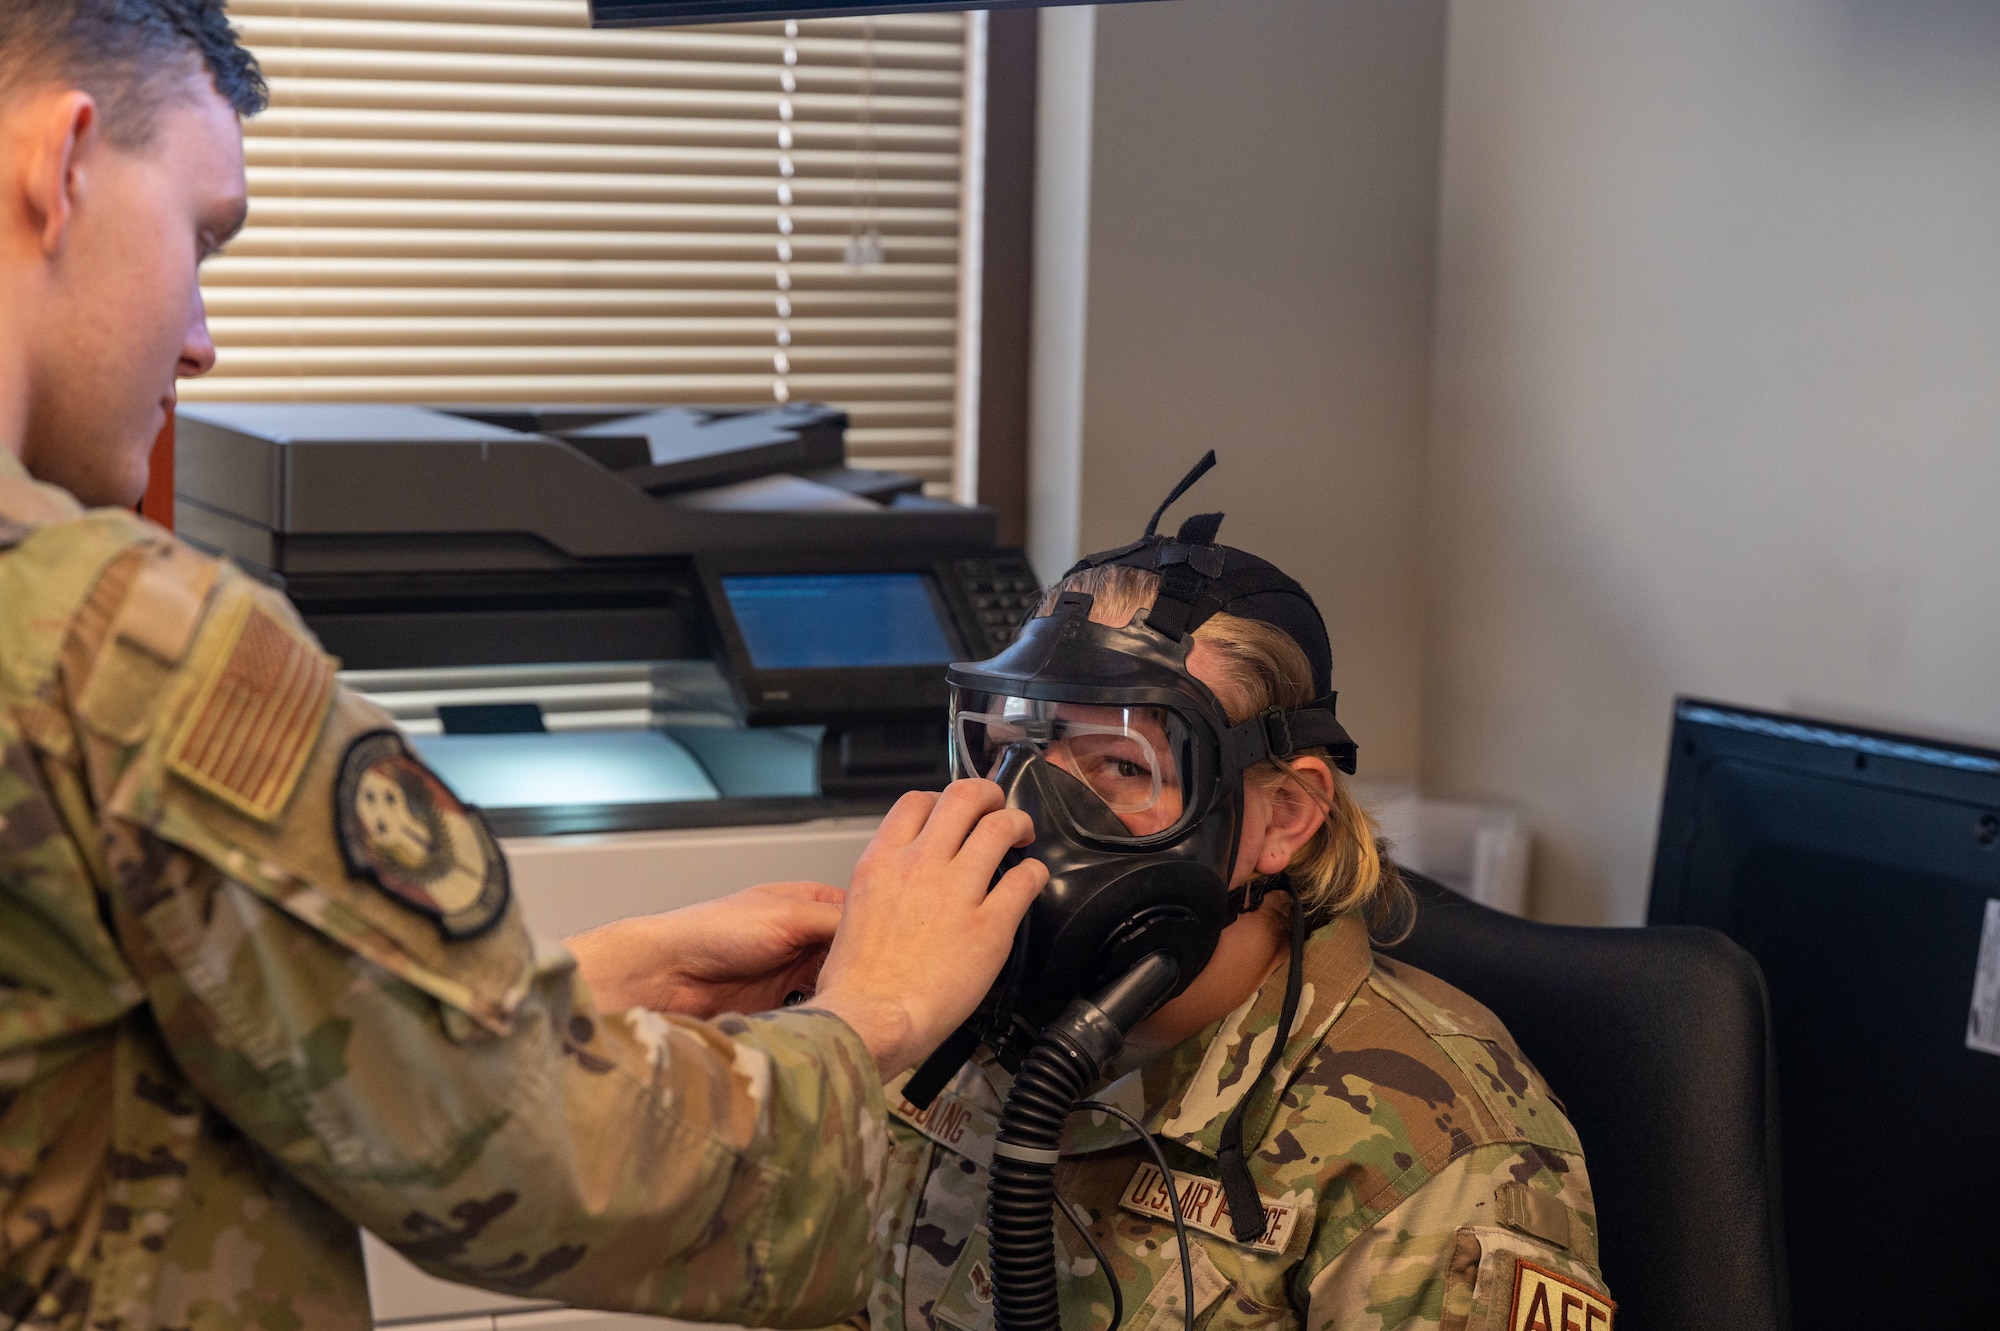 U.S. Air Force Airman 1st Class Elijah Bartley, 563rd Operations Support Squadron aircrew flight equipment specialist, left, assists Airman 1st Class Trinity Bowling, 563rd OSS aircrew flight equipment specialist, right, with a M69 Joint Service Aircrew Mask Strategic Aircraft respirator mask at Davis-Monthan Air Force Base, Ariz., March 5, 2024. Bartley and Bowling were participants of a new equipment training course featuring the M69 respirator mask. (U.S. Air Force photo by Airman 1st Class Robert Allen Cooke III)